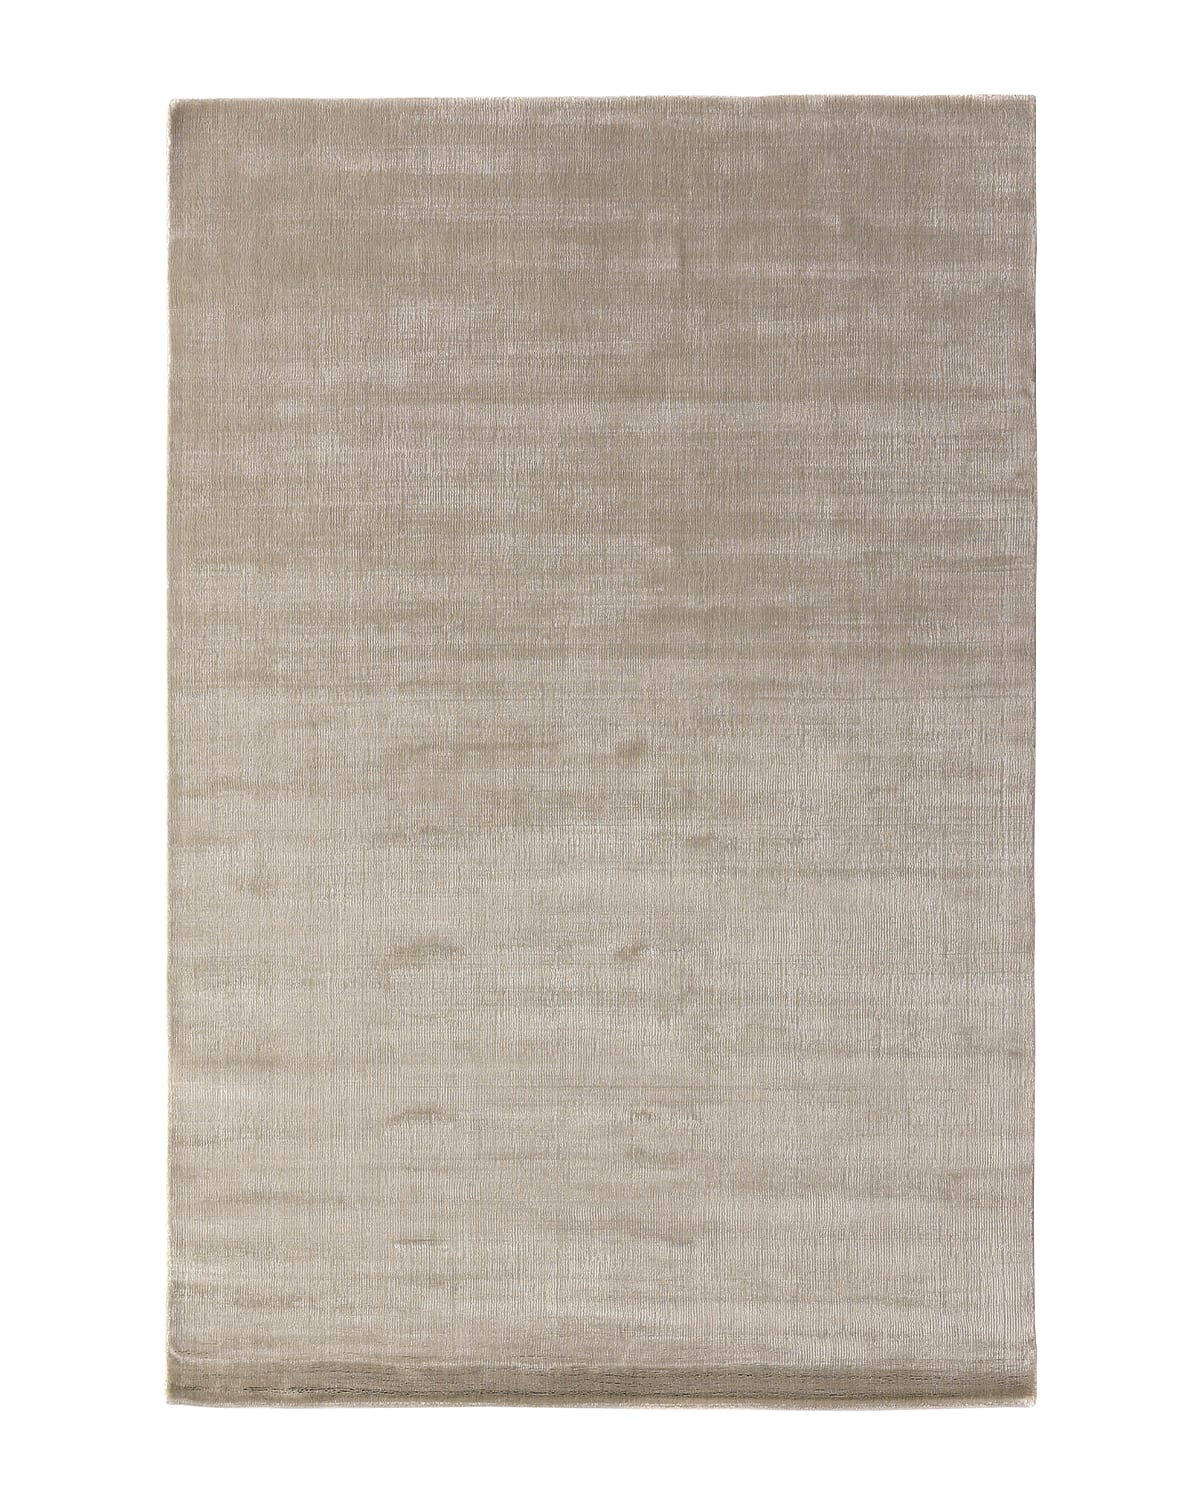 Exquisite Rugs Gwendolyn Rug, 8' X 10' In Neutral